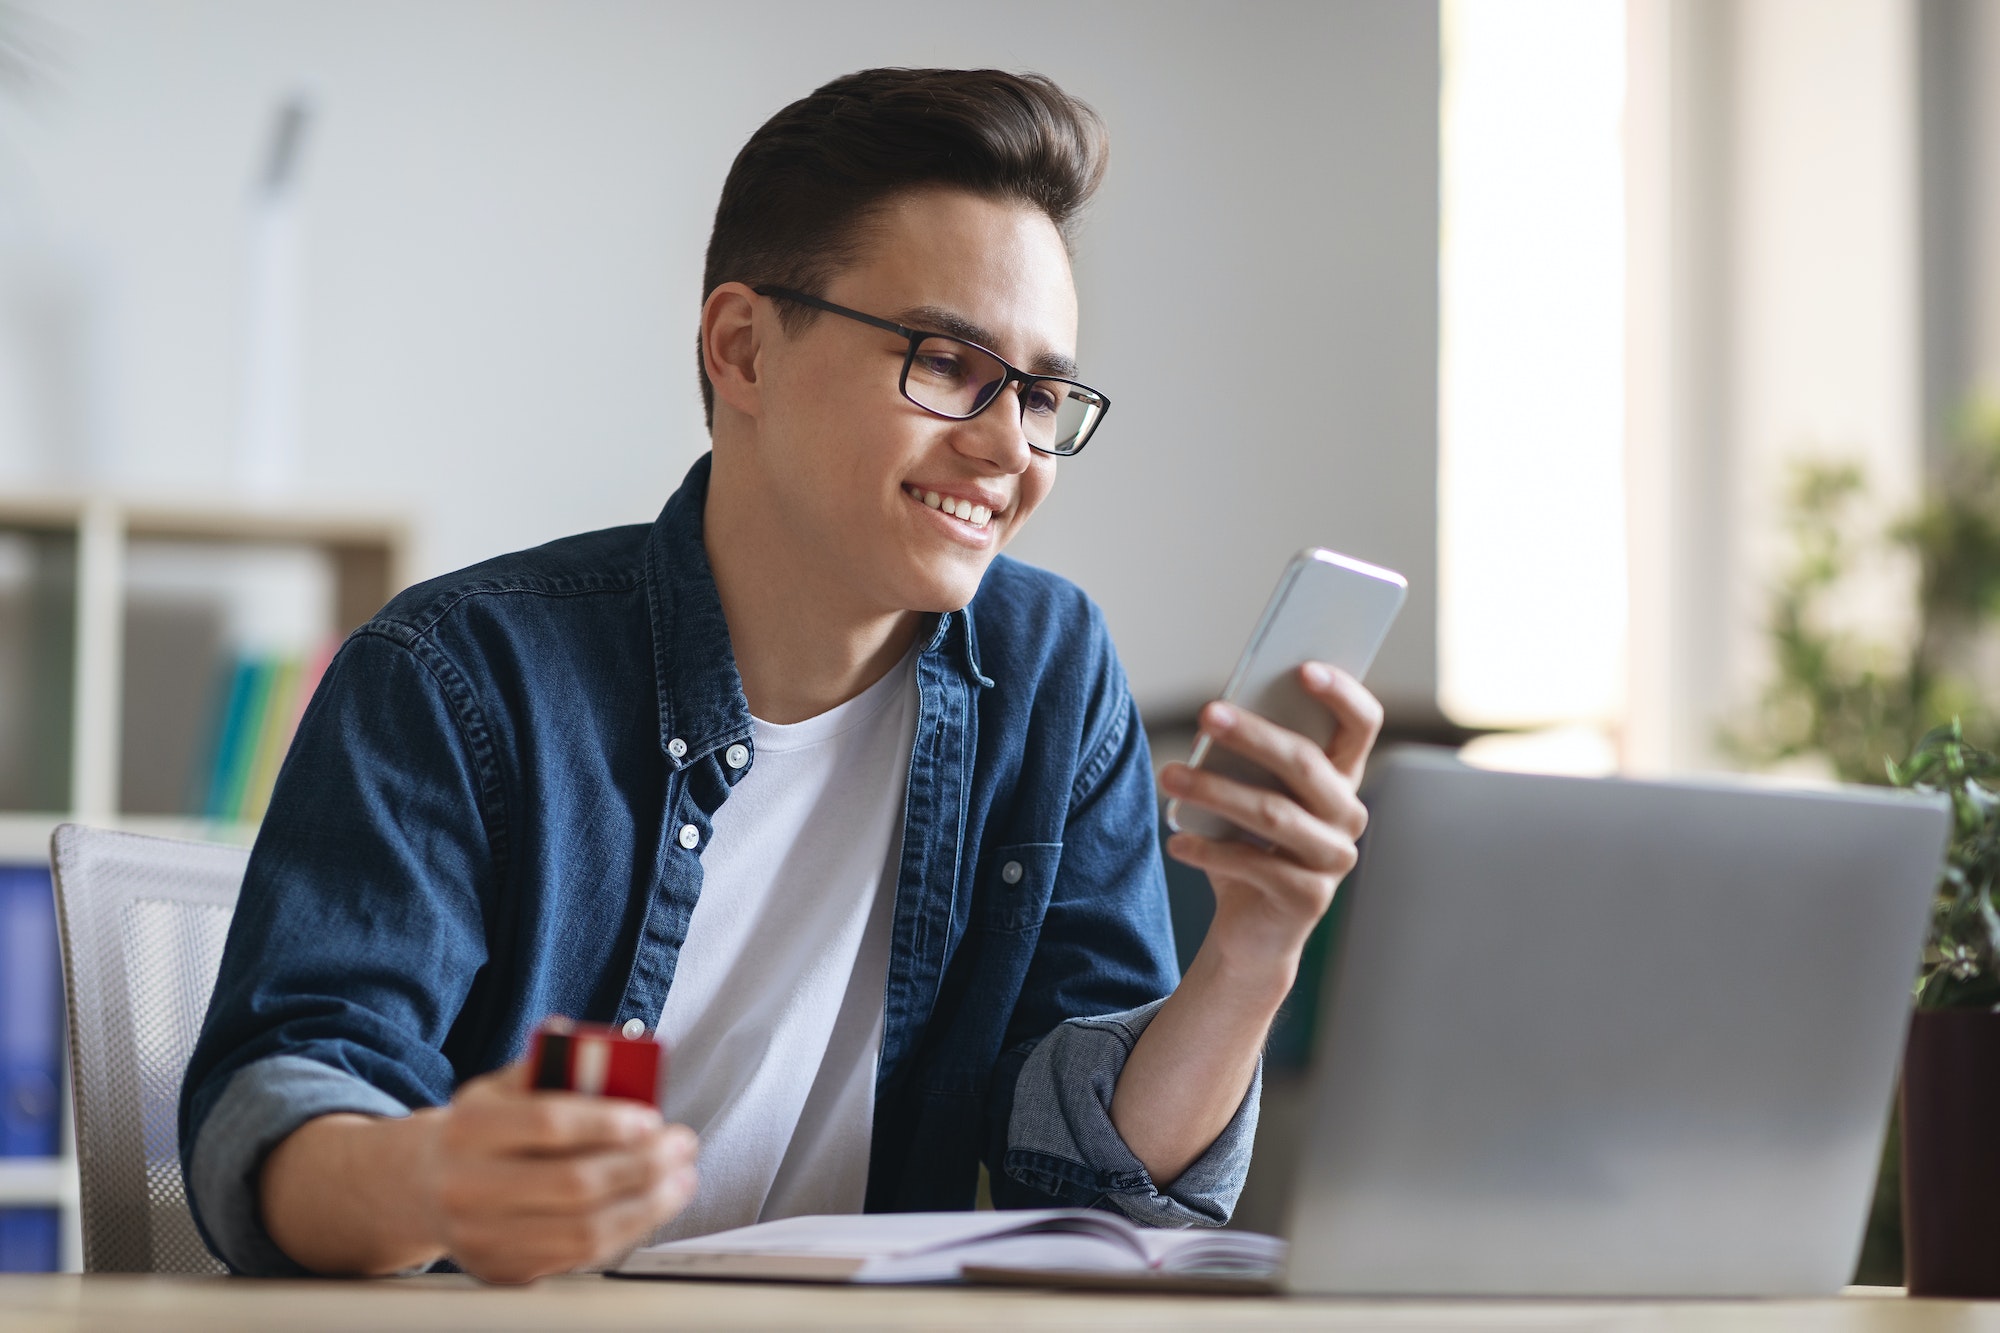 Smiling Young Office Worker Holding Credit Card And Smartphone, Making Order Online